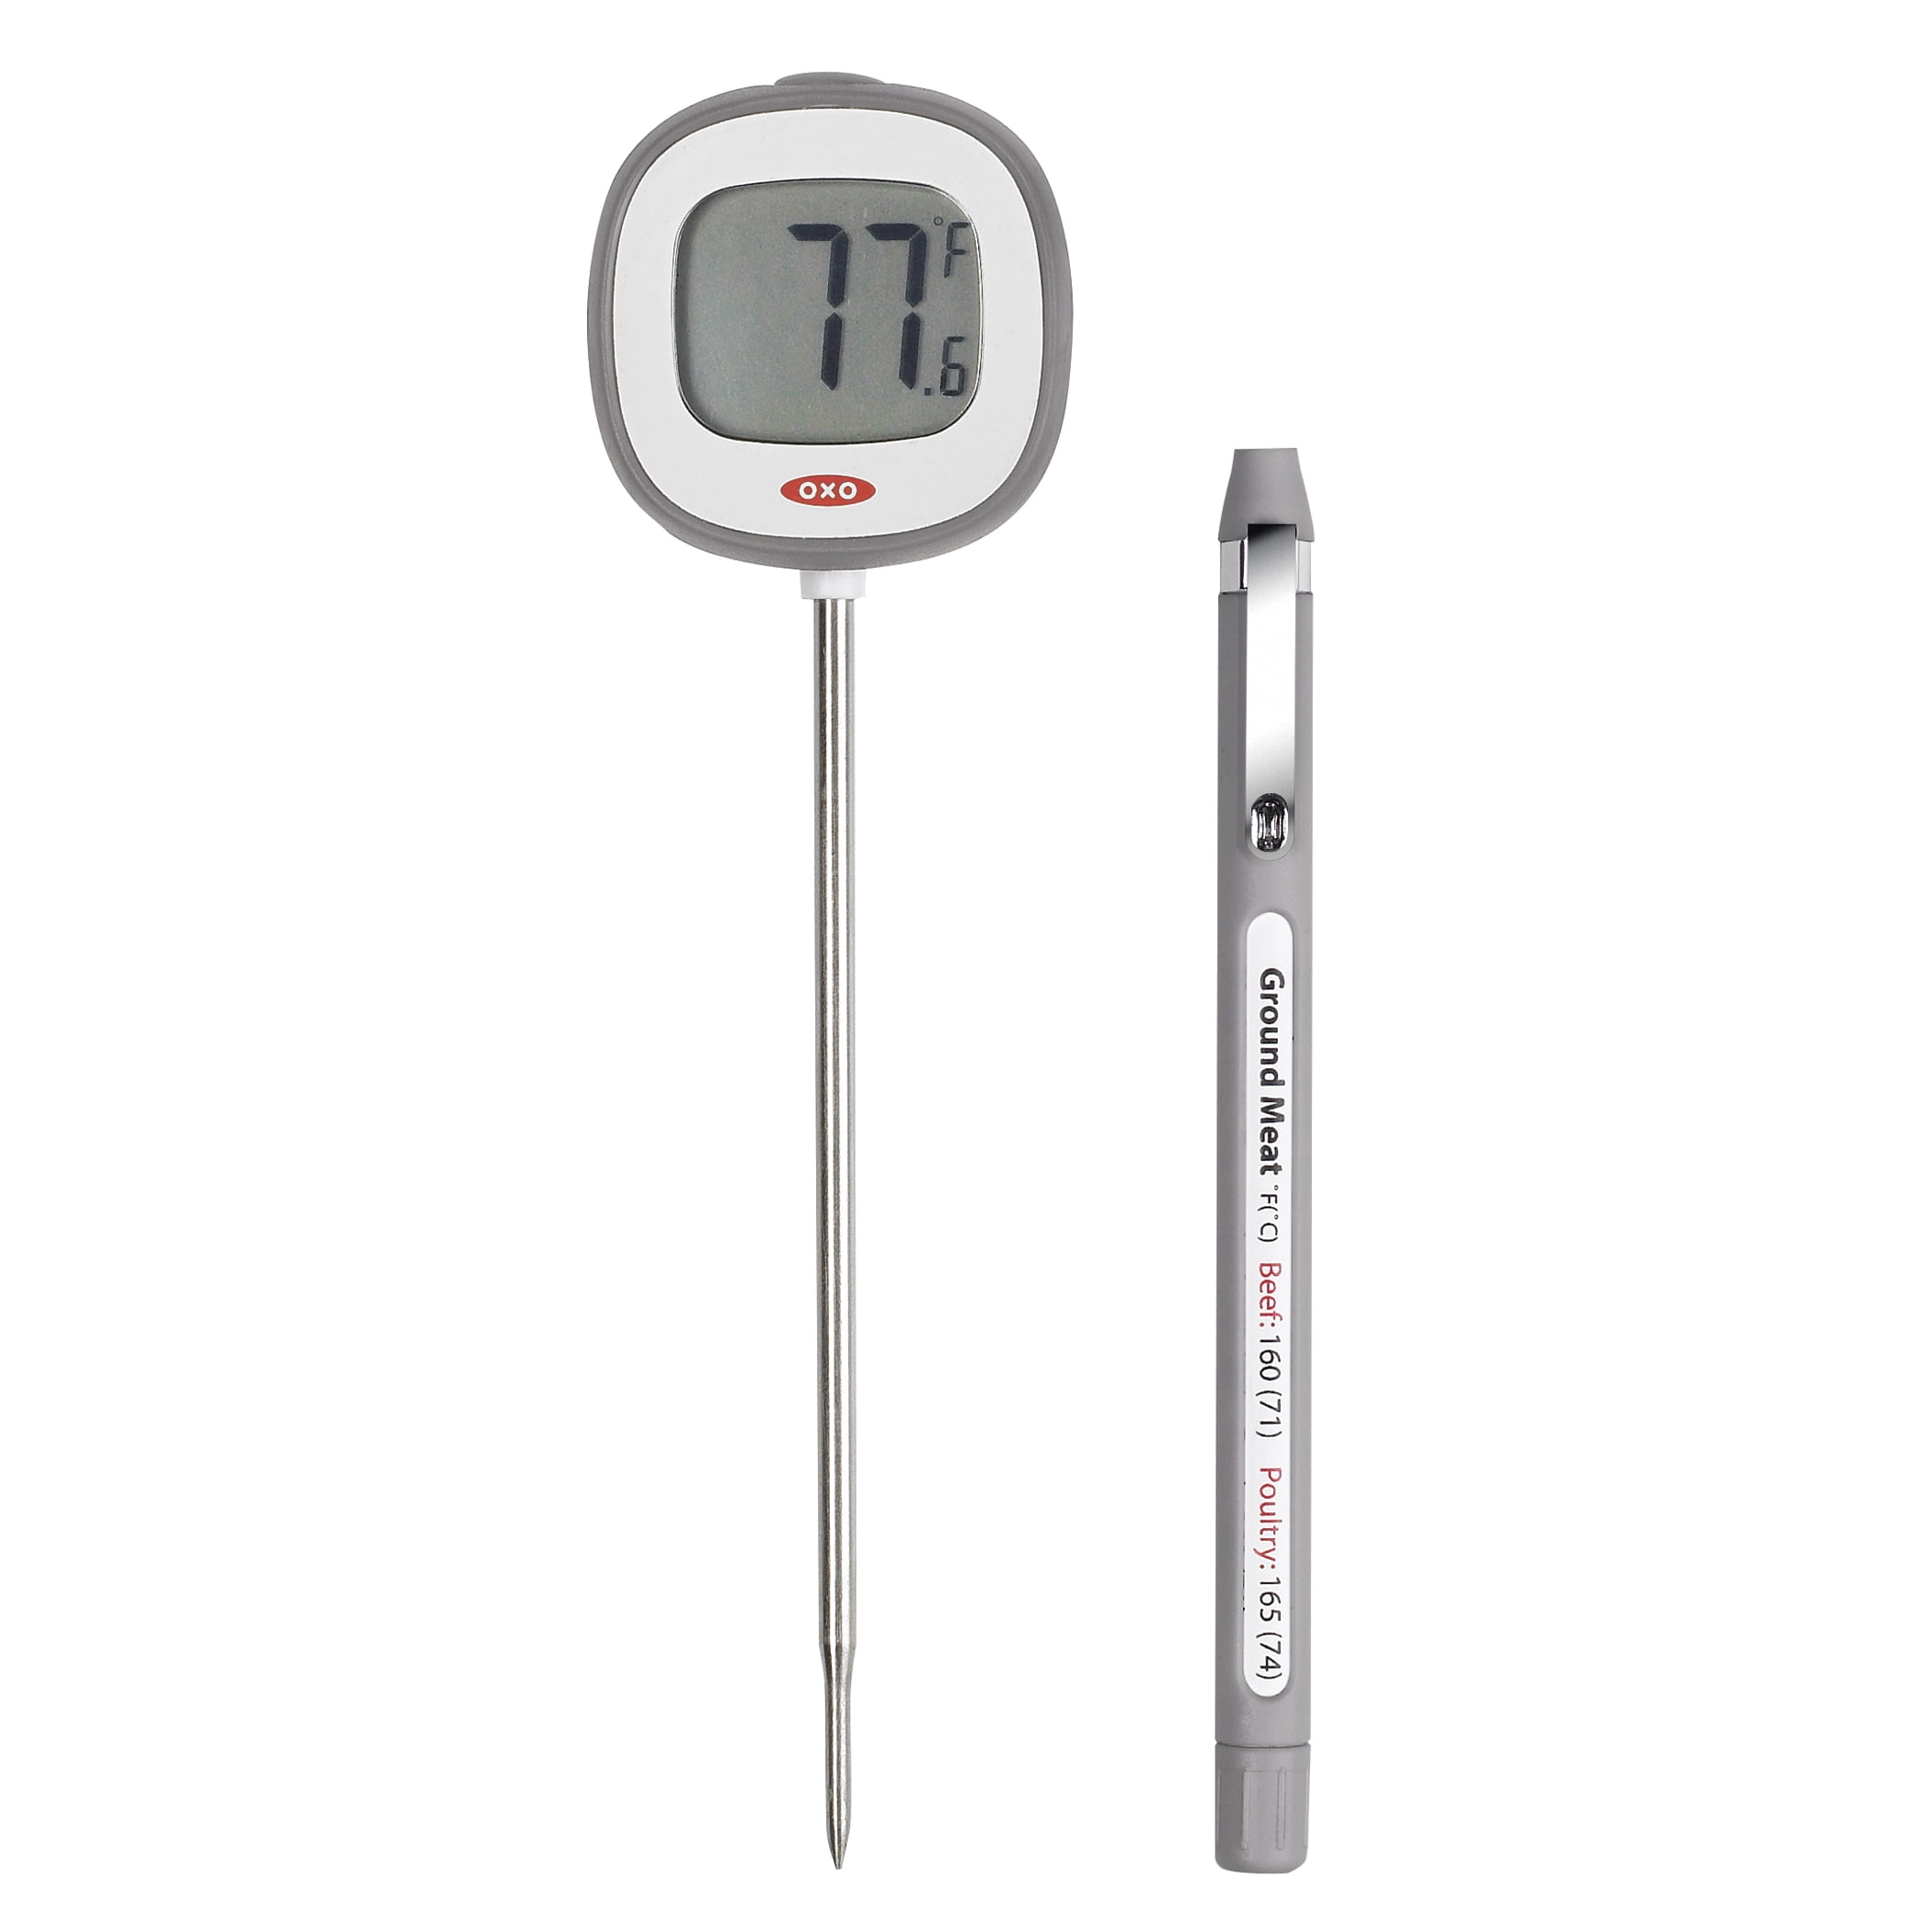 OXO Soft Works Digital Instant Read Thermometer - Gray/White, 1 ct